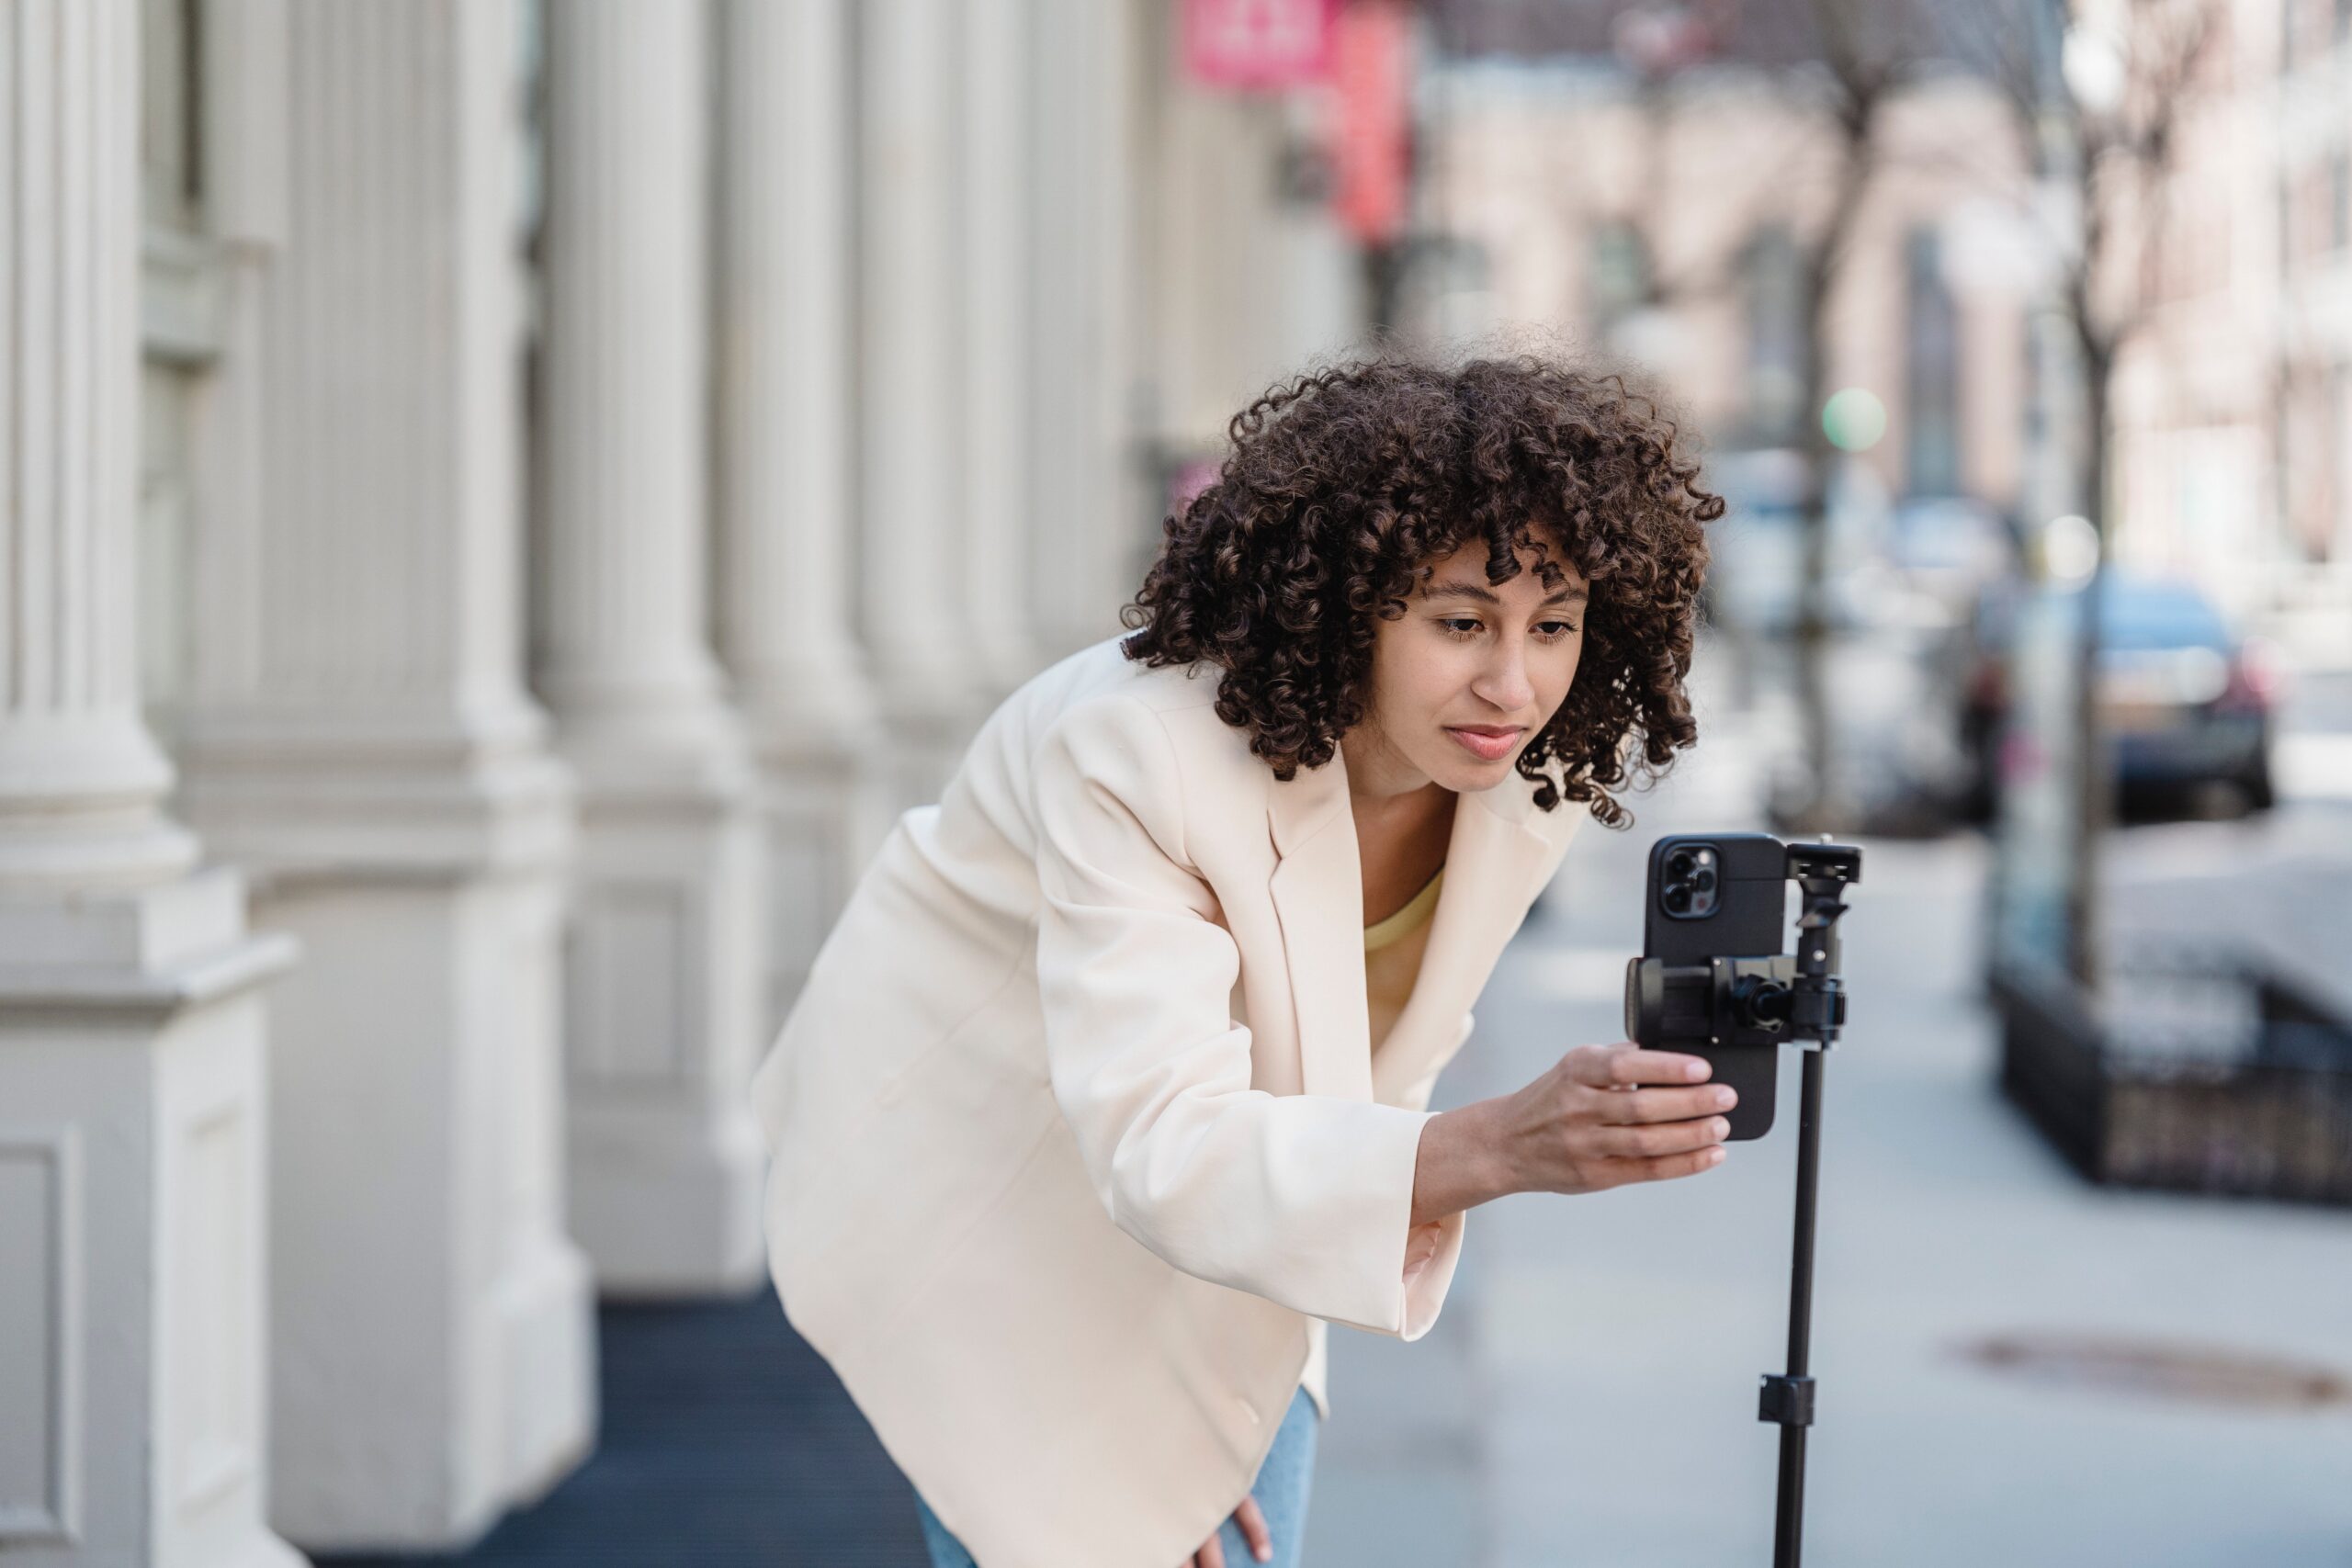 Content creator in a light-colored coat using a smartphone on a tripod to record a video on a city sidewalk, focused on adjusting the device.